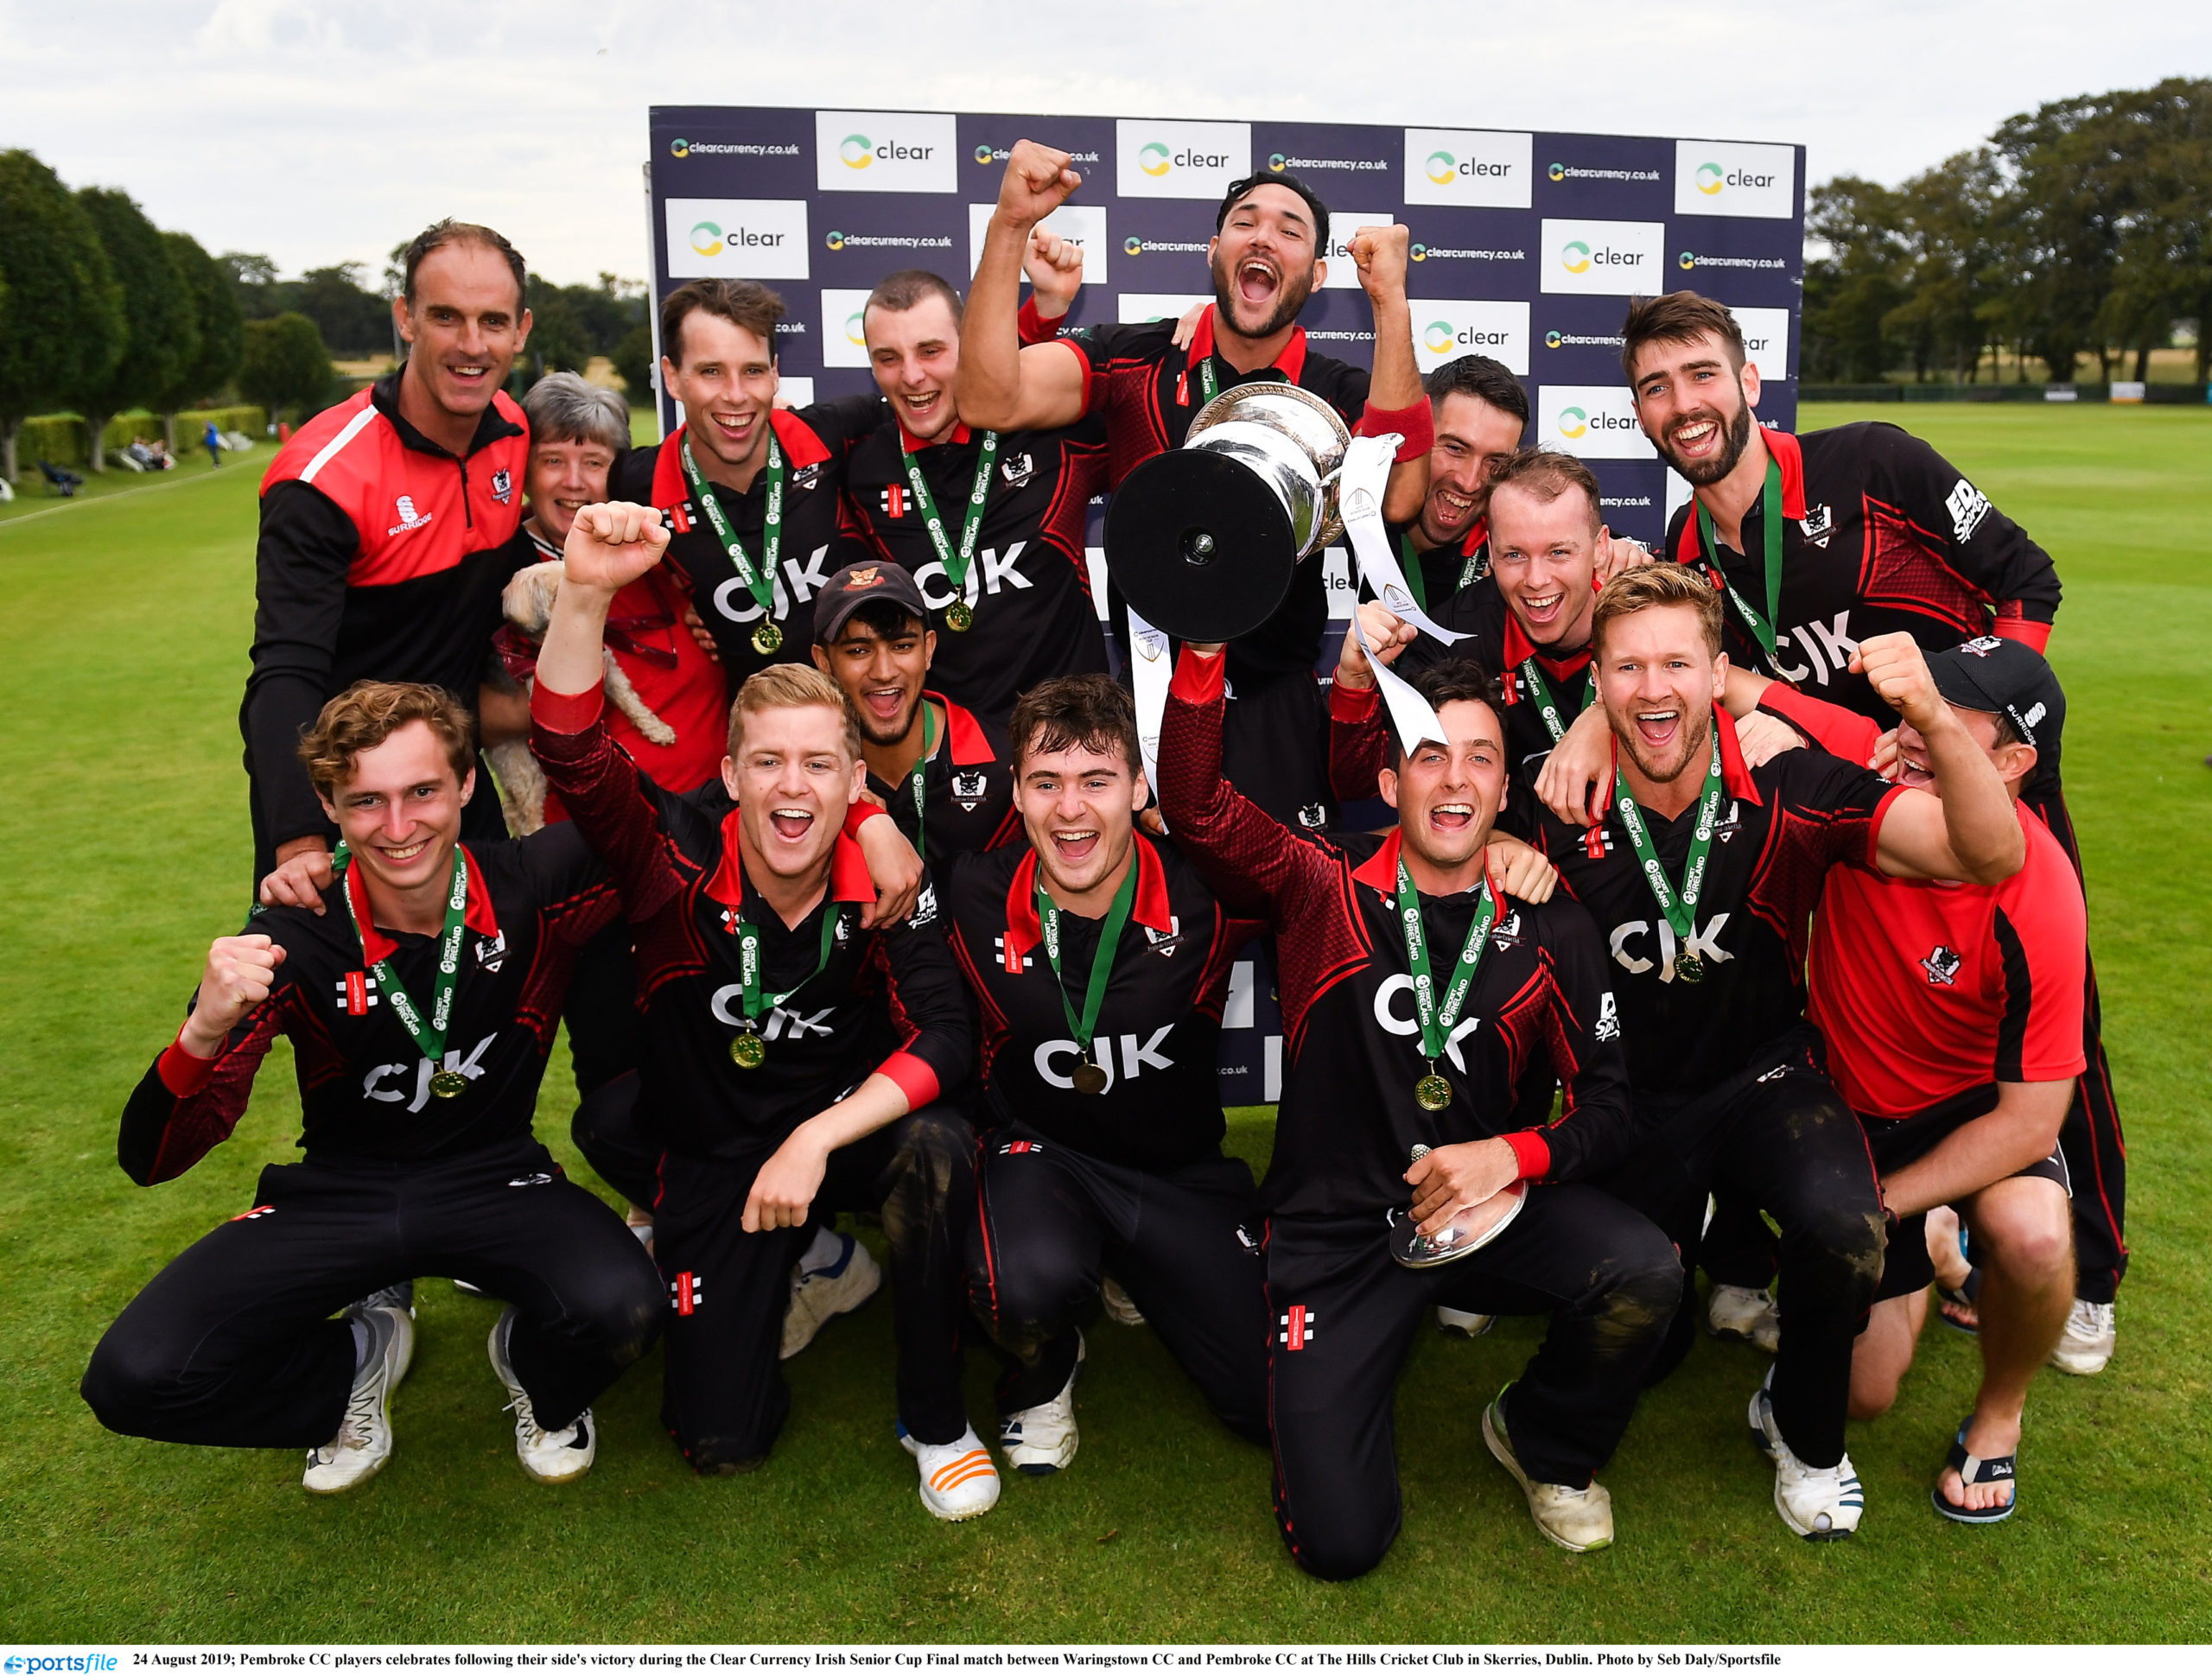 Cricket Ireland: First Round Draws for Clear Currency Irish Senior Cup and Clear Currency National Cup